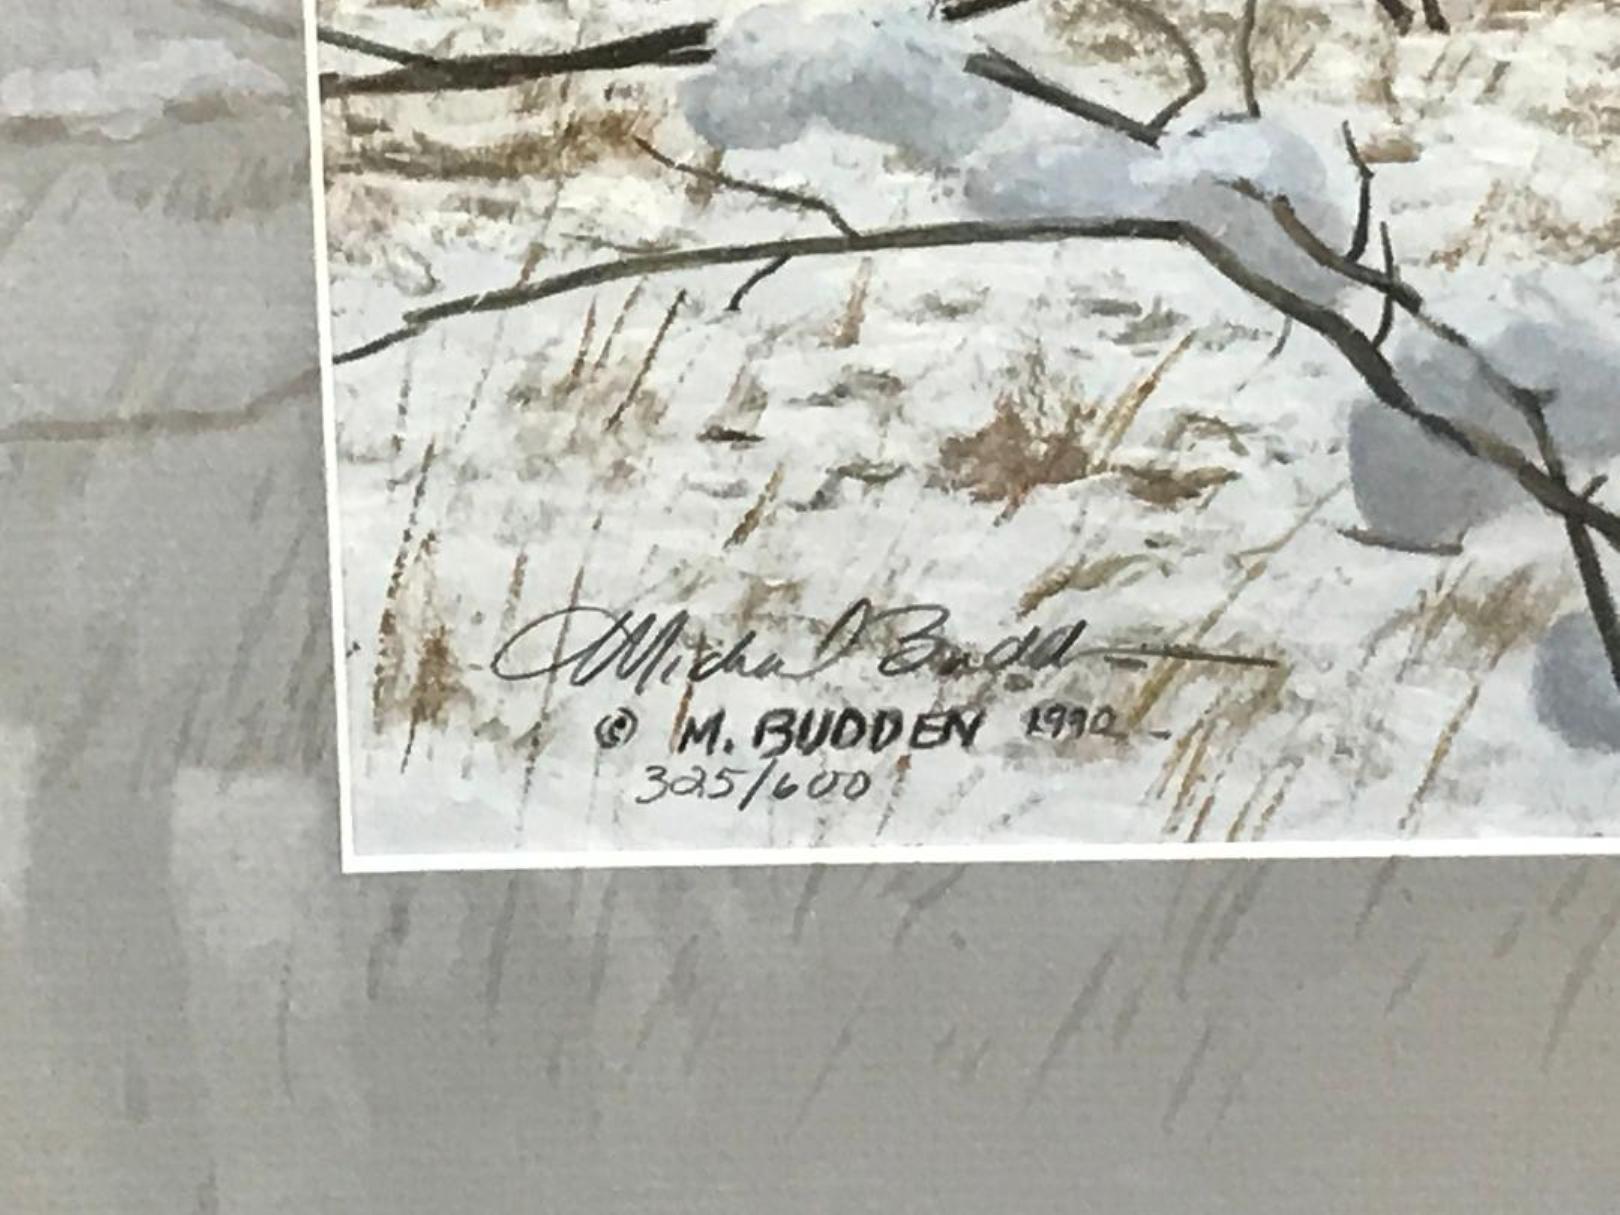 A limited edition offset print by award winning contemporary artist Michael Budden that showcases a cardinal in his natural rural environment at a moments rest on a fence line created in an impressionistic realism style housed in a hand painted